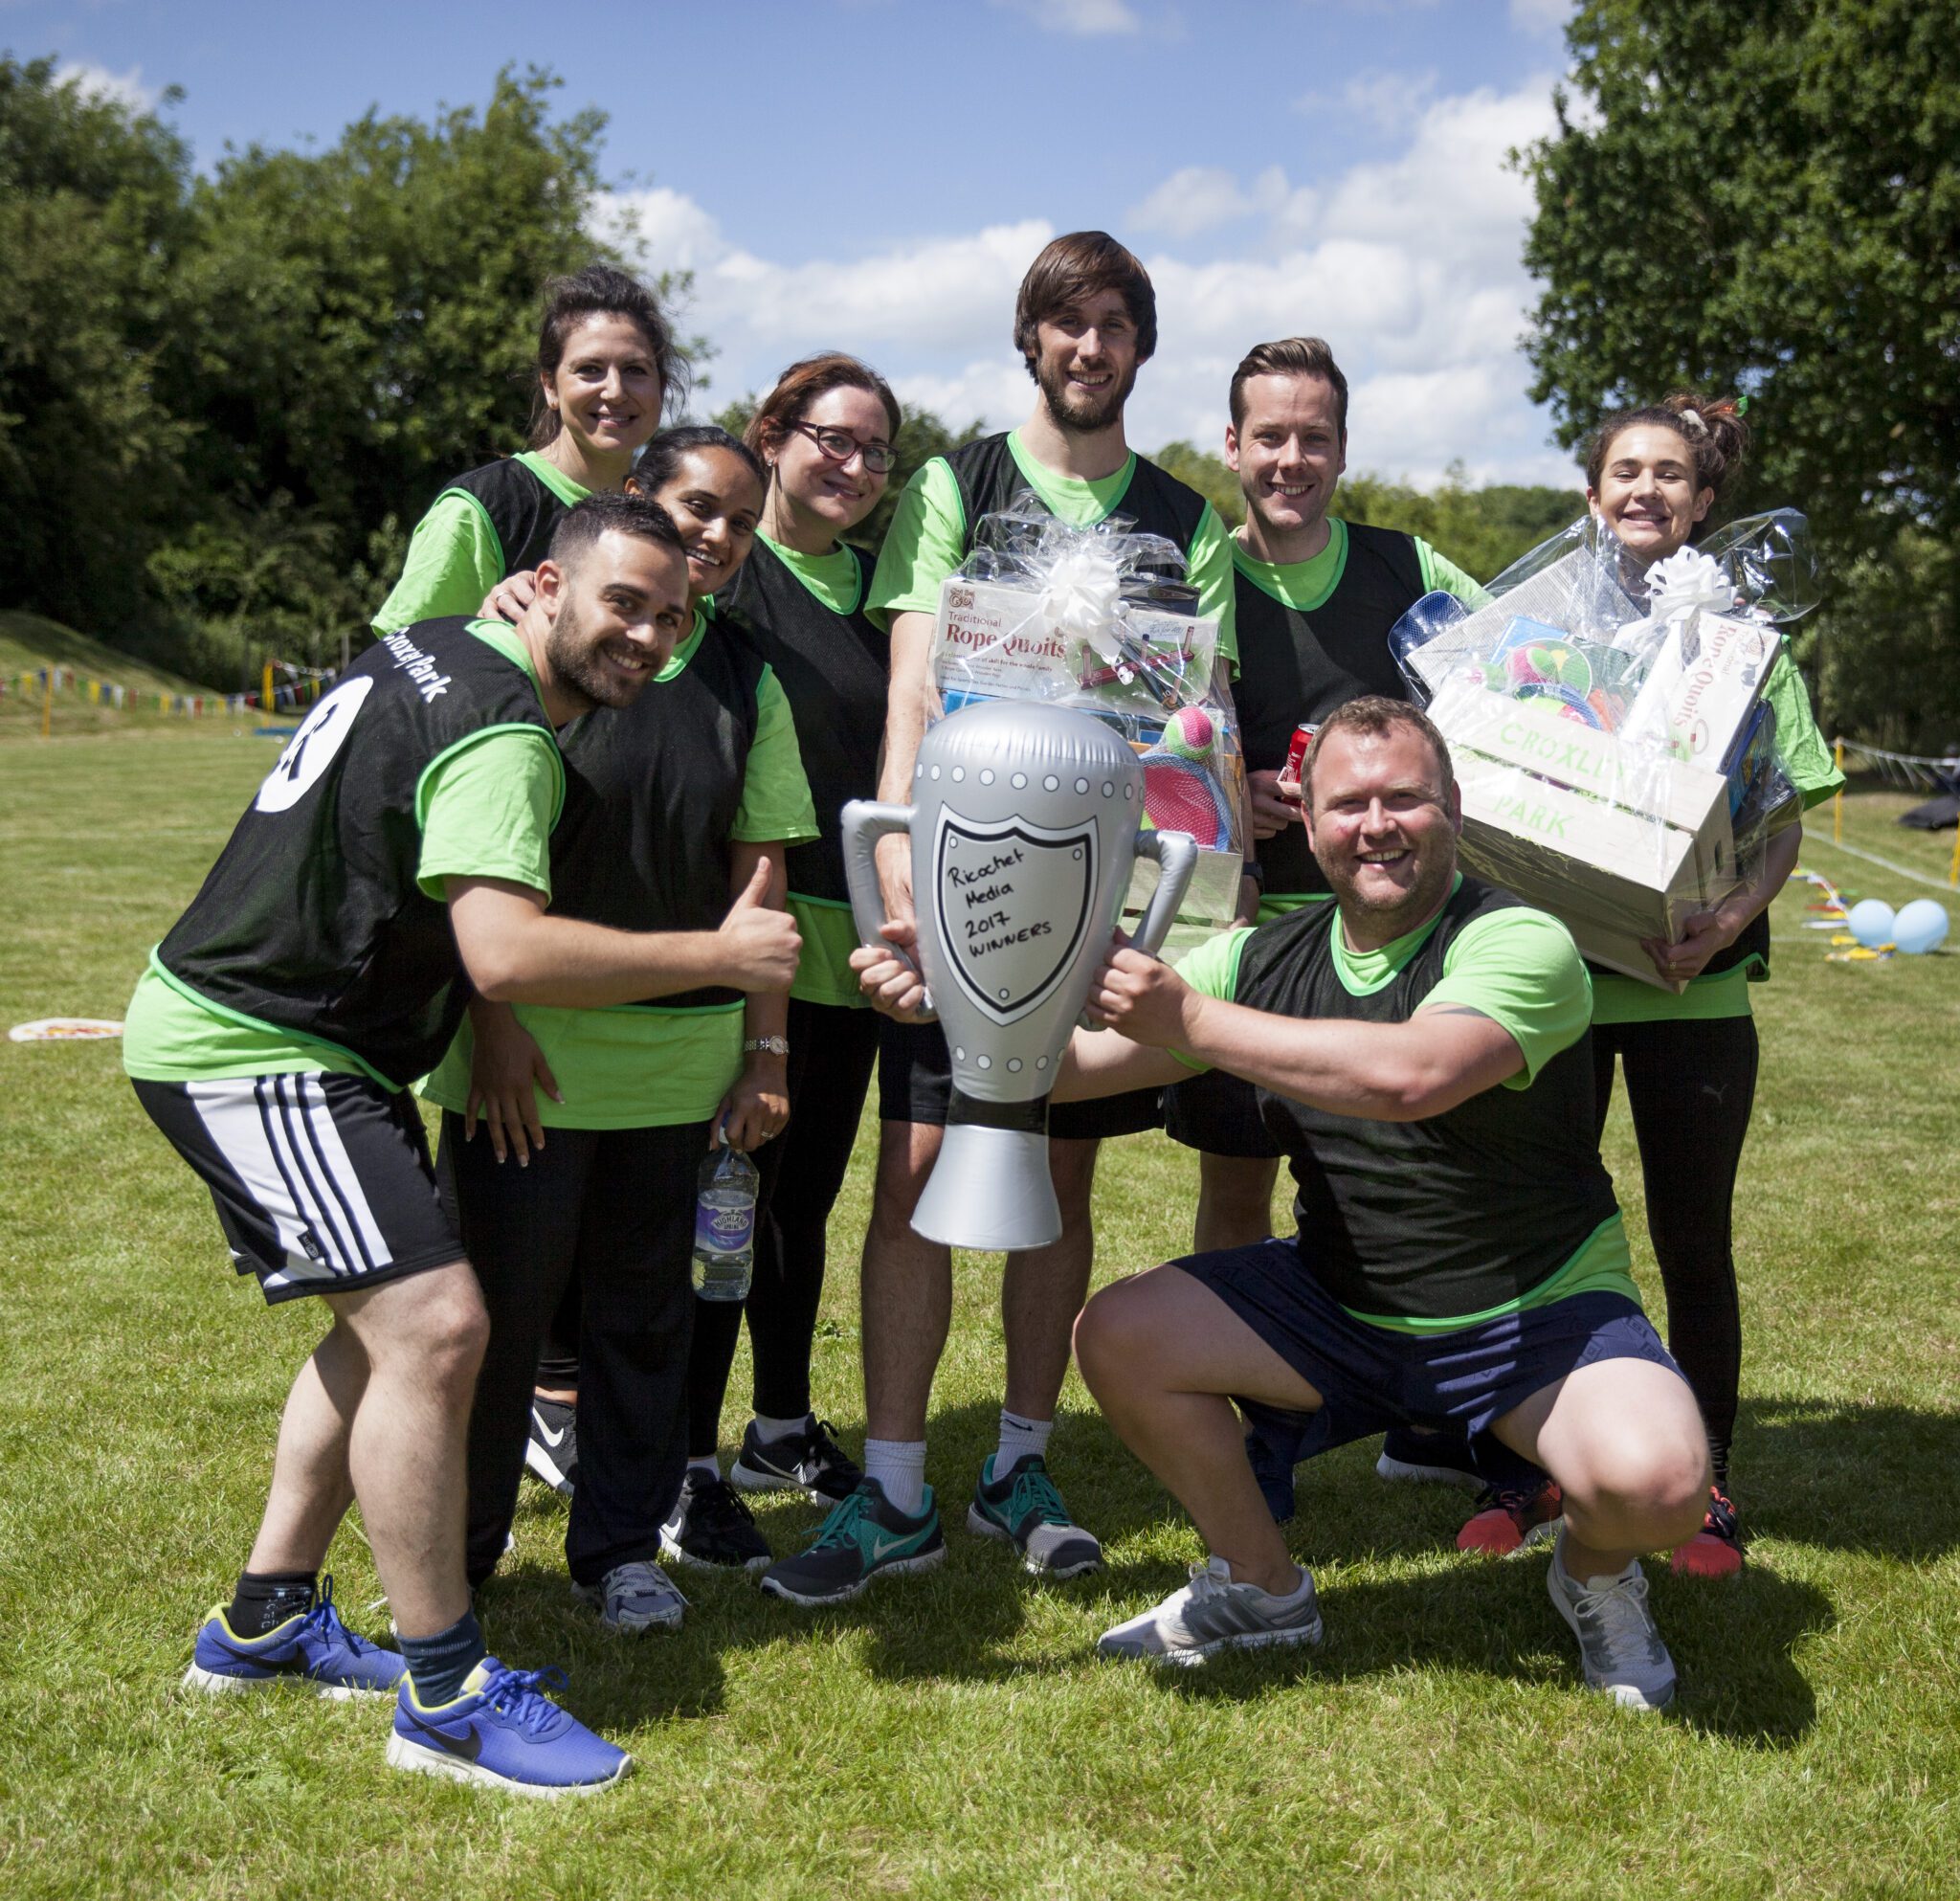 Croxley Park Sports Day | Team Photo with Winning Cup